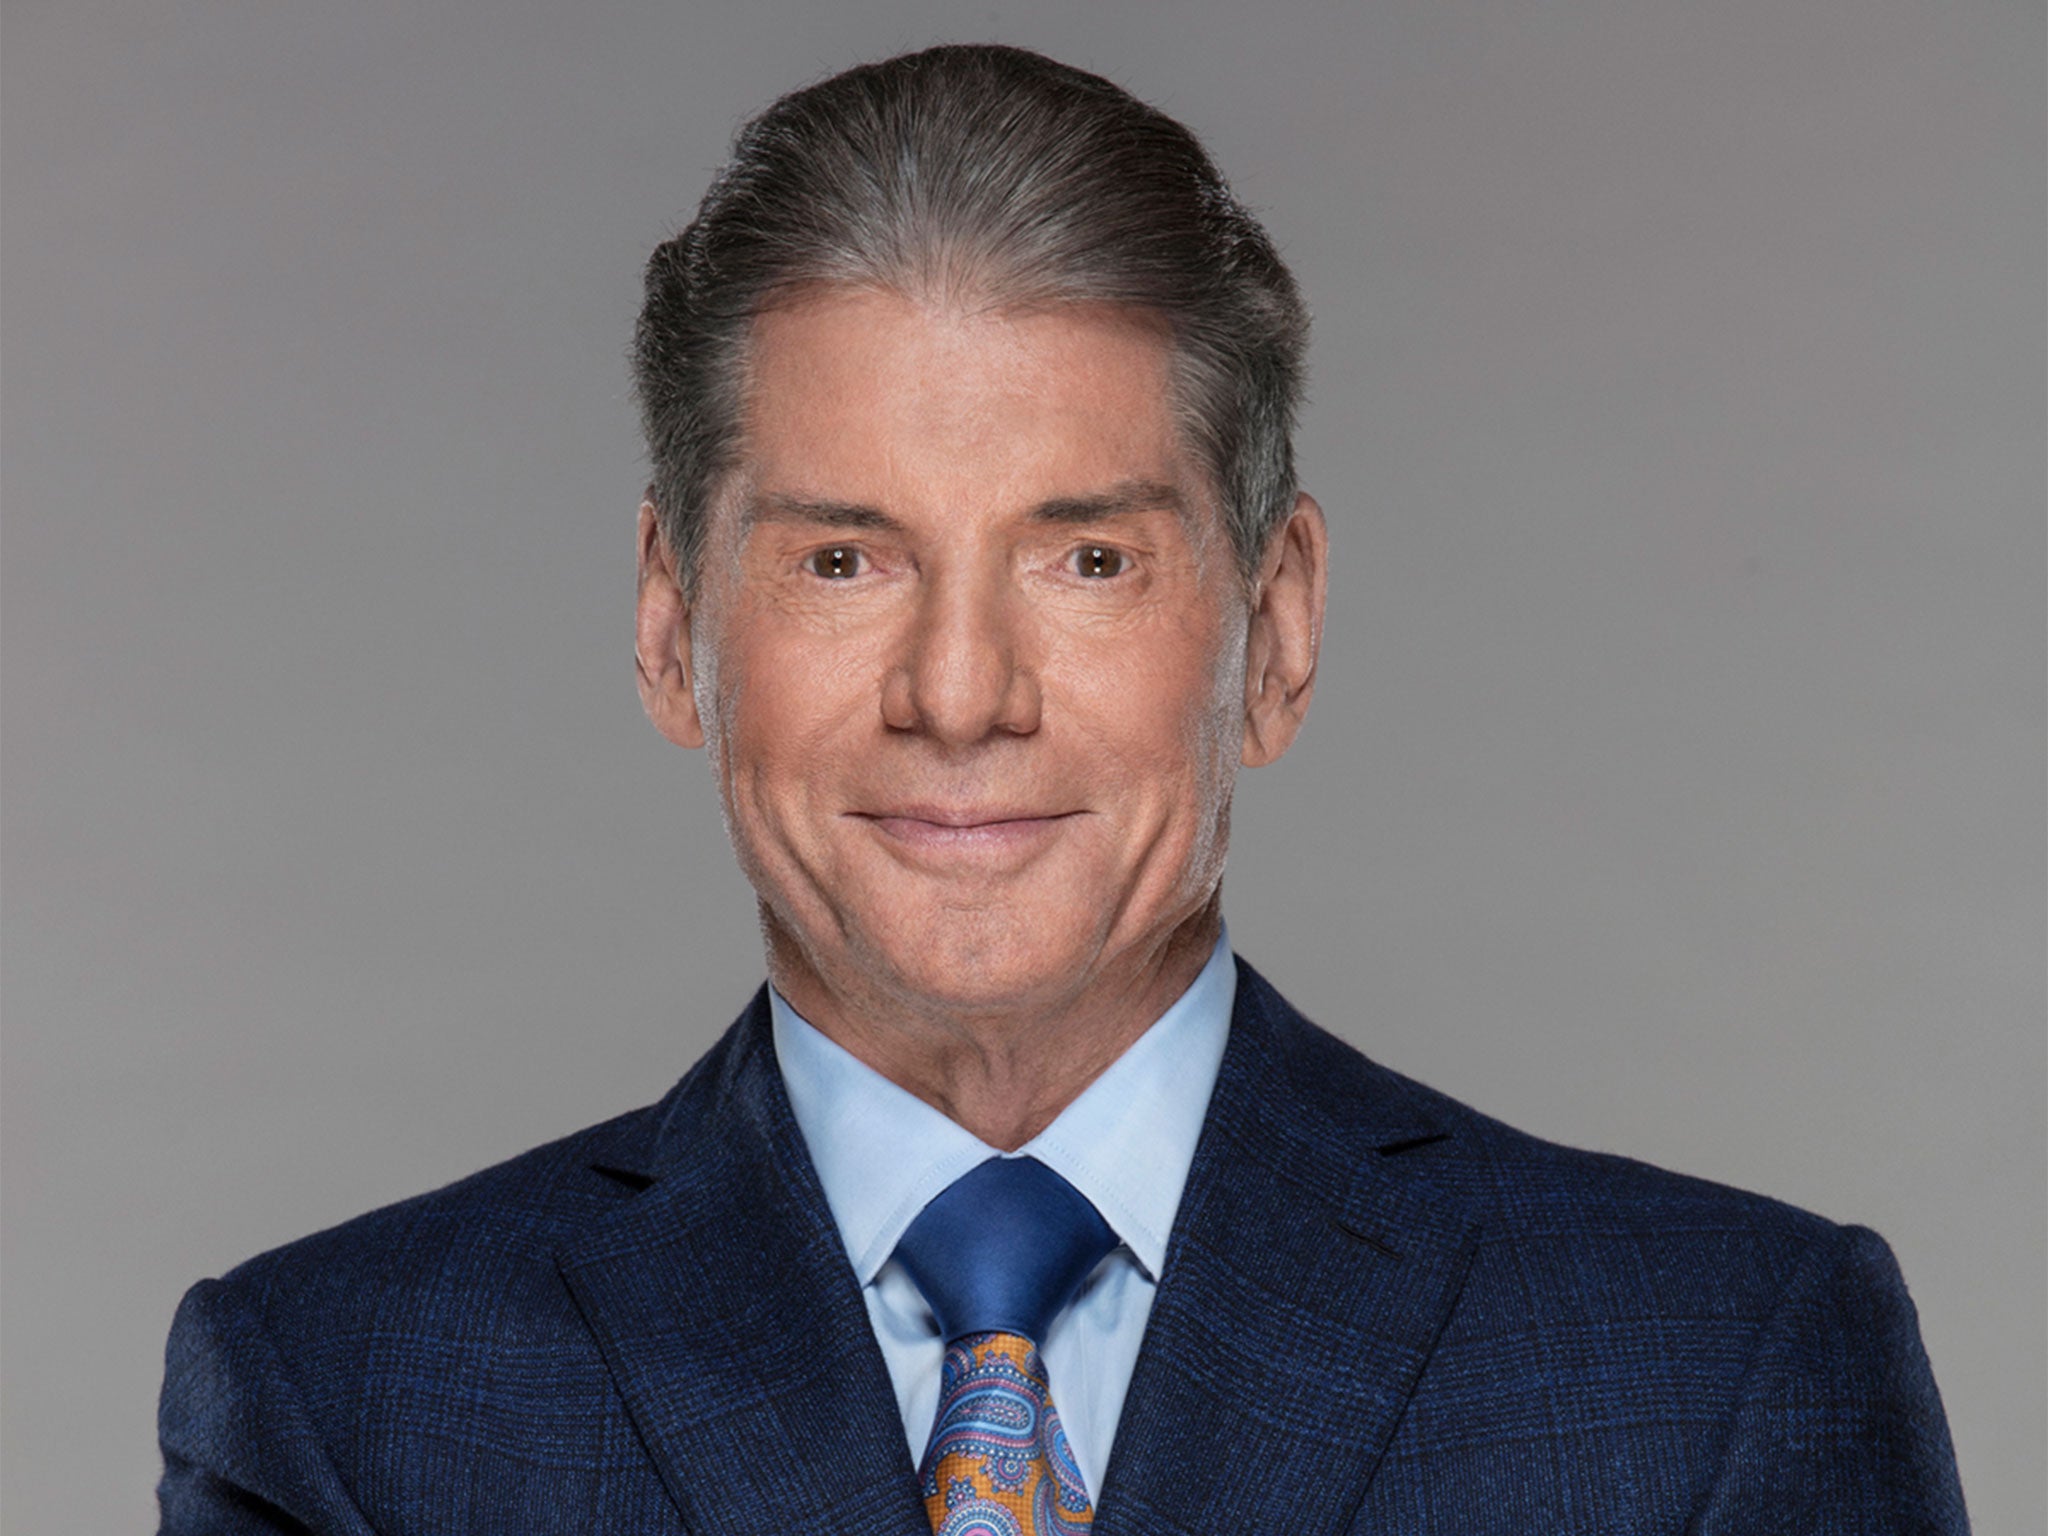 Vince McMahon has announced the return of XFL